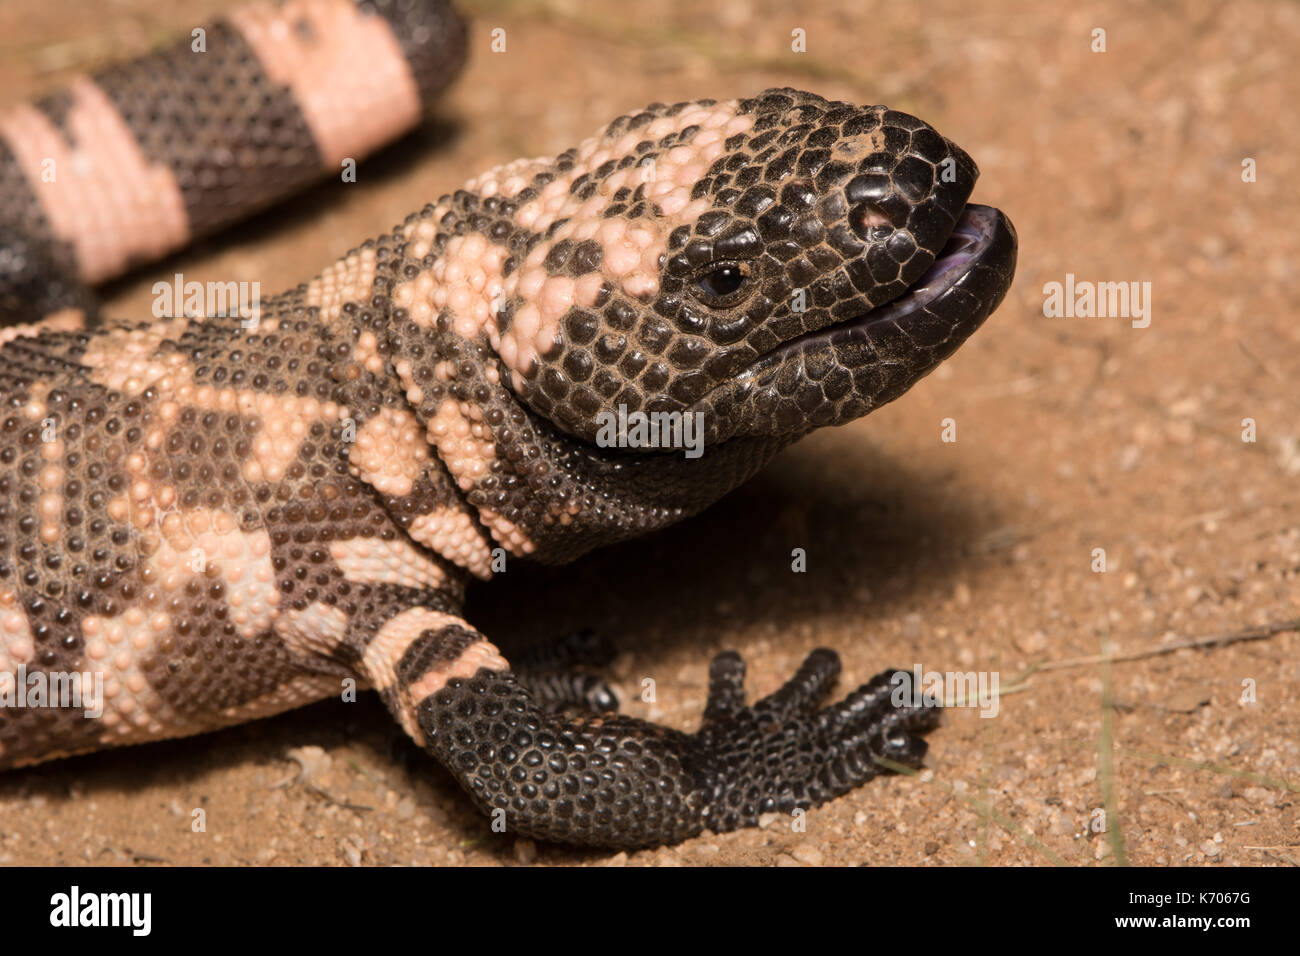 Gila Monster (Heloderma suspectum) from Sonora, Mexico. Stock Photo